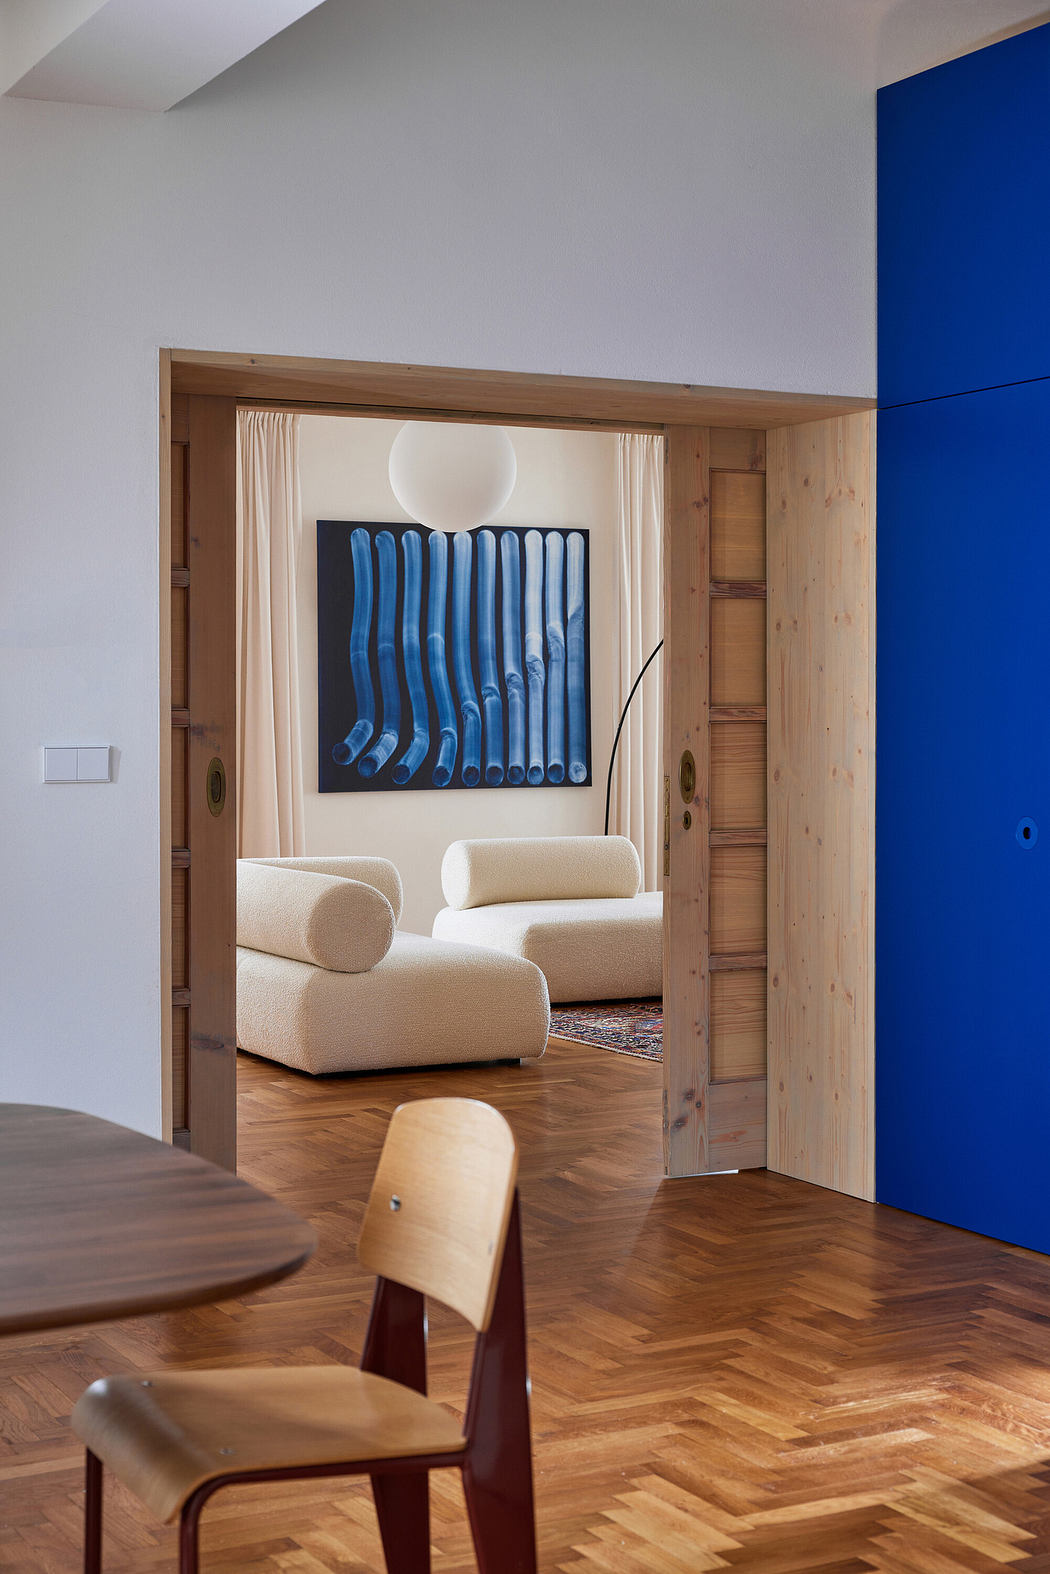 Modern room with blue accent wall, wooden details, herringbone floor, and